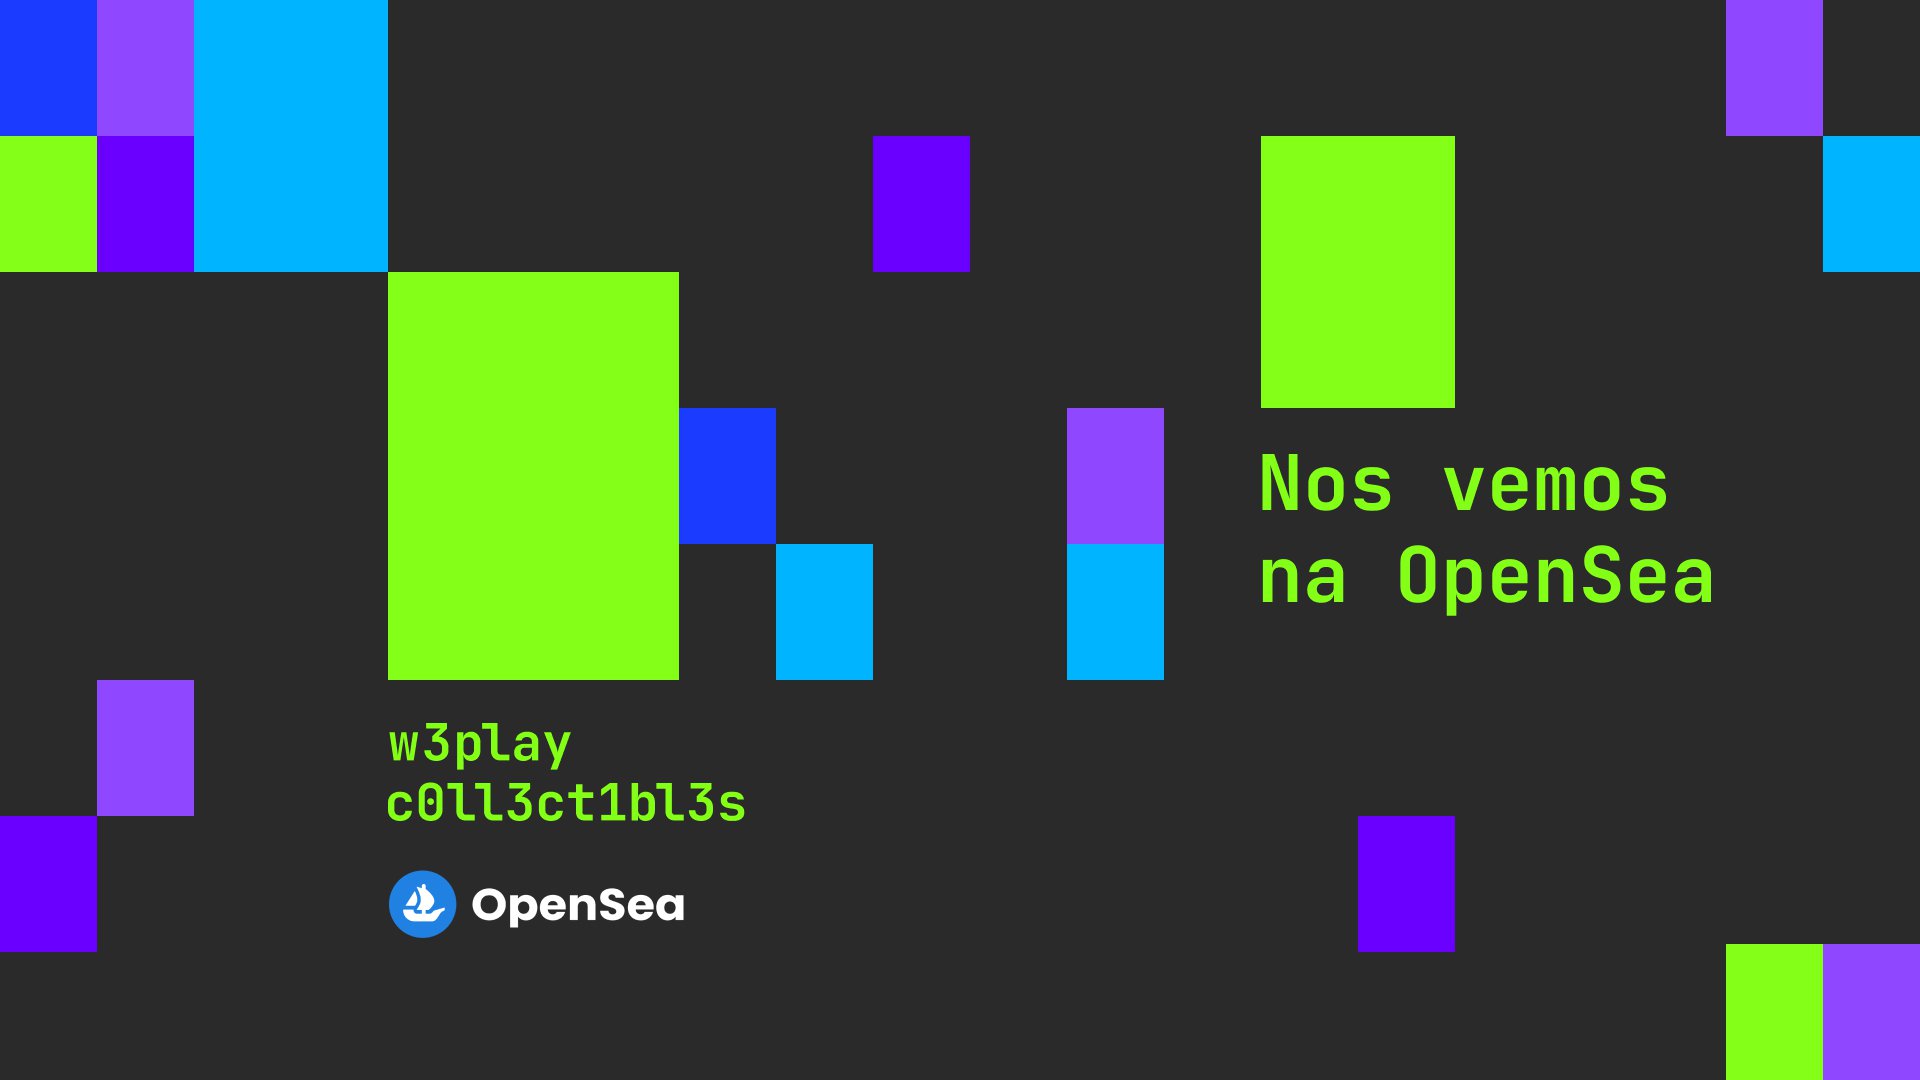 WePlay Collectibles: nos vemos na OpenSea. Imagem: WePlay Holding